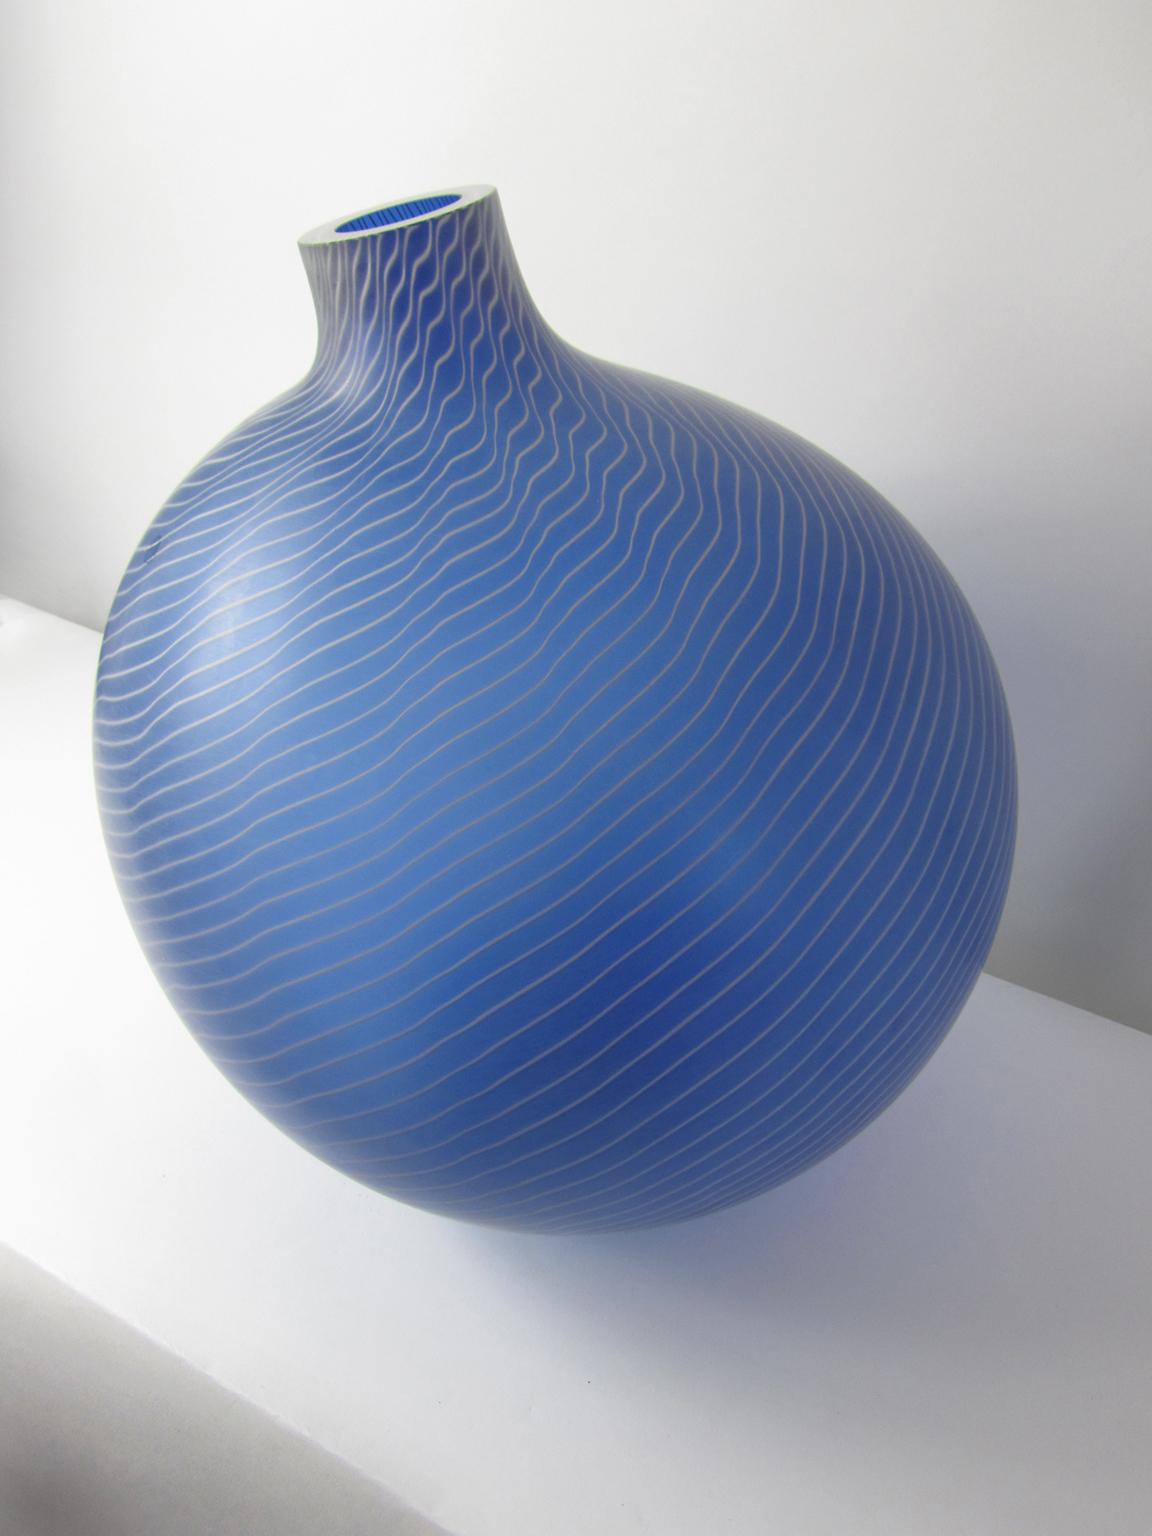 This stunning vessel is by Salviati, Its scale makes it most unusual, and the asymmetrical ovoid shape adds to its unique beauty. The exterior is a matte sapphire blue with ultra thin white canes that swirl around the entire shape. This vessel is